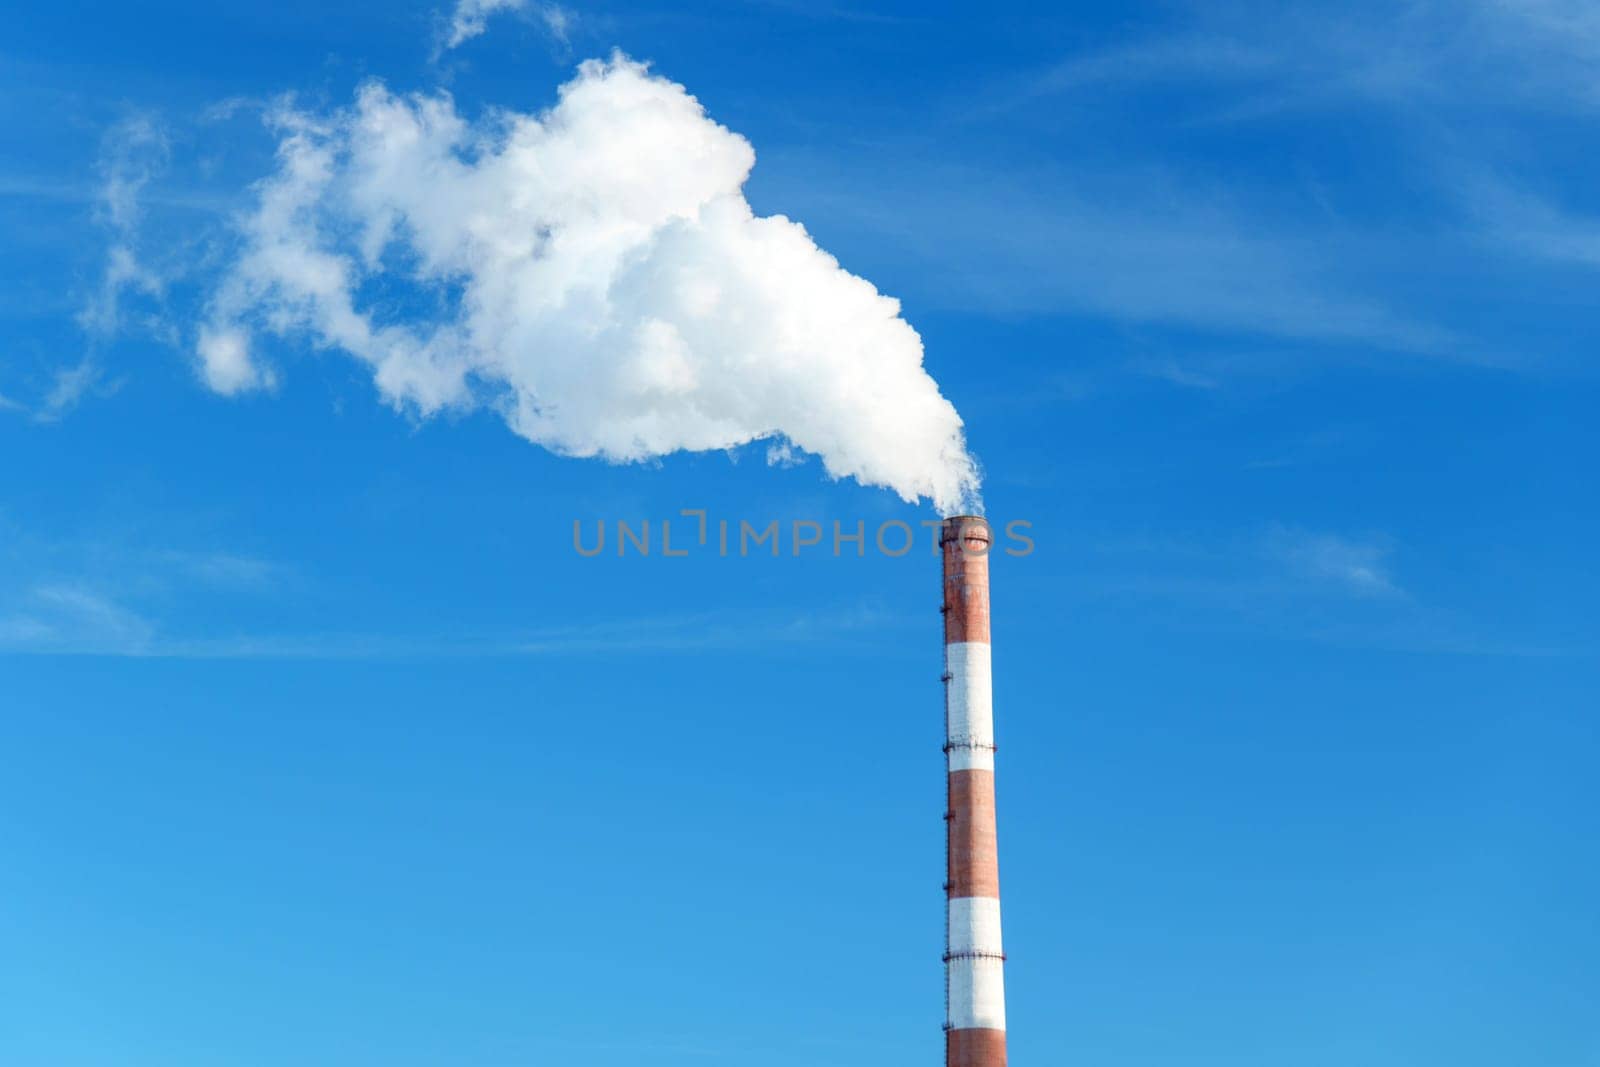 Smokestack emits thick smoke from a pipe, contrasting against a clear blue sky by darksoul72